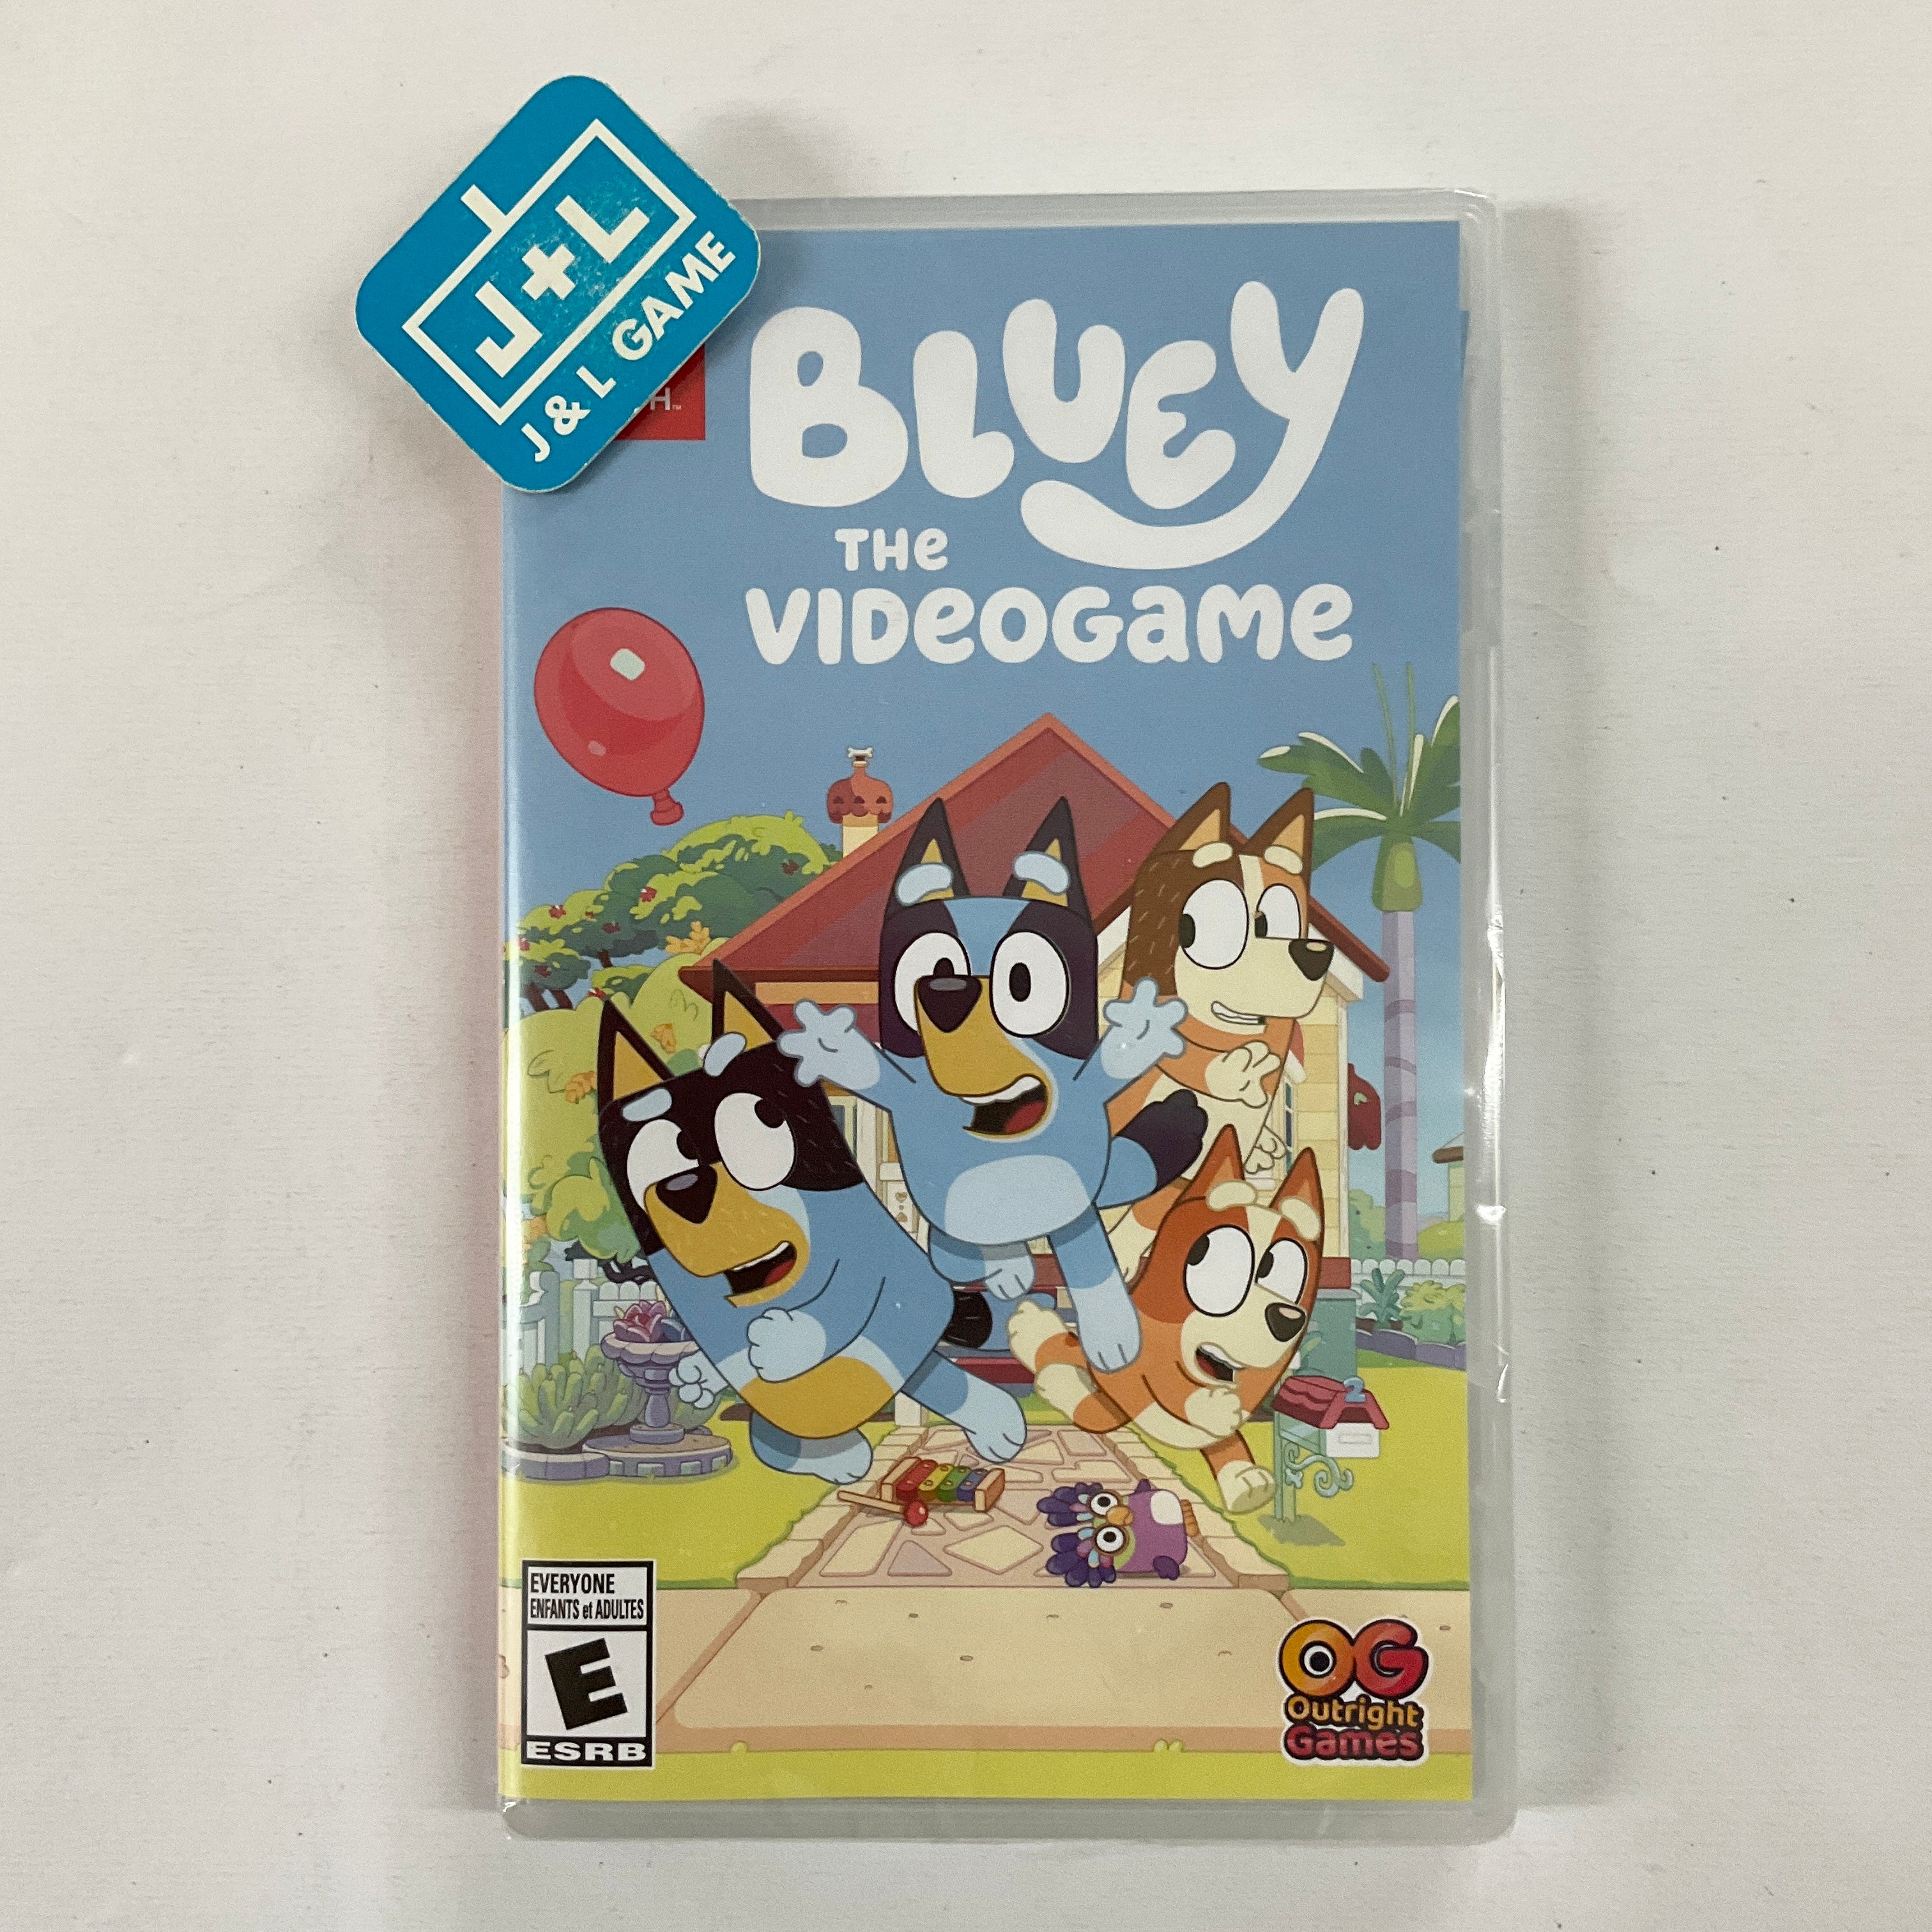 Bluey: The Videogame - (NSW) Nintendo Switch Video Games Outright Games   